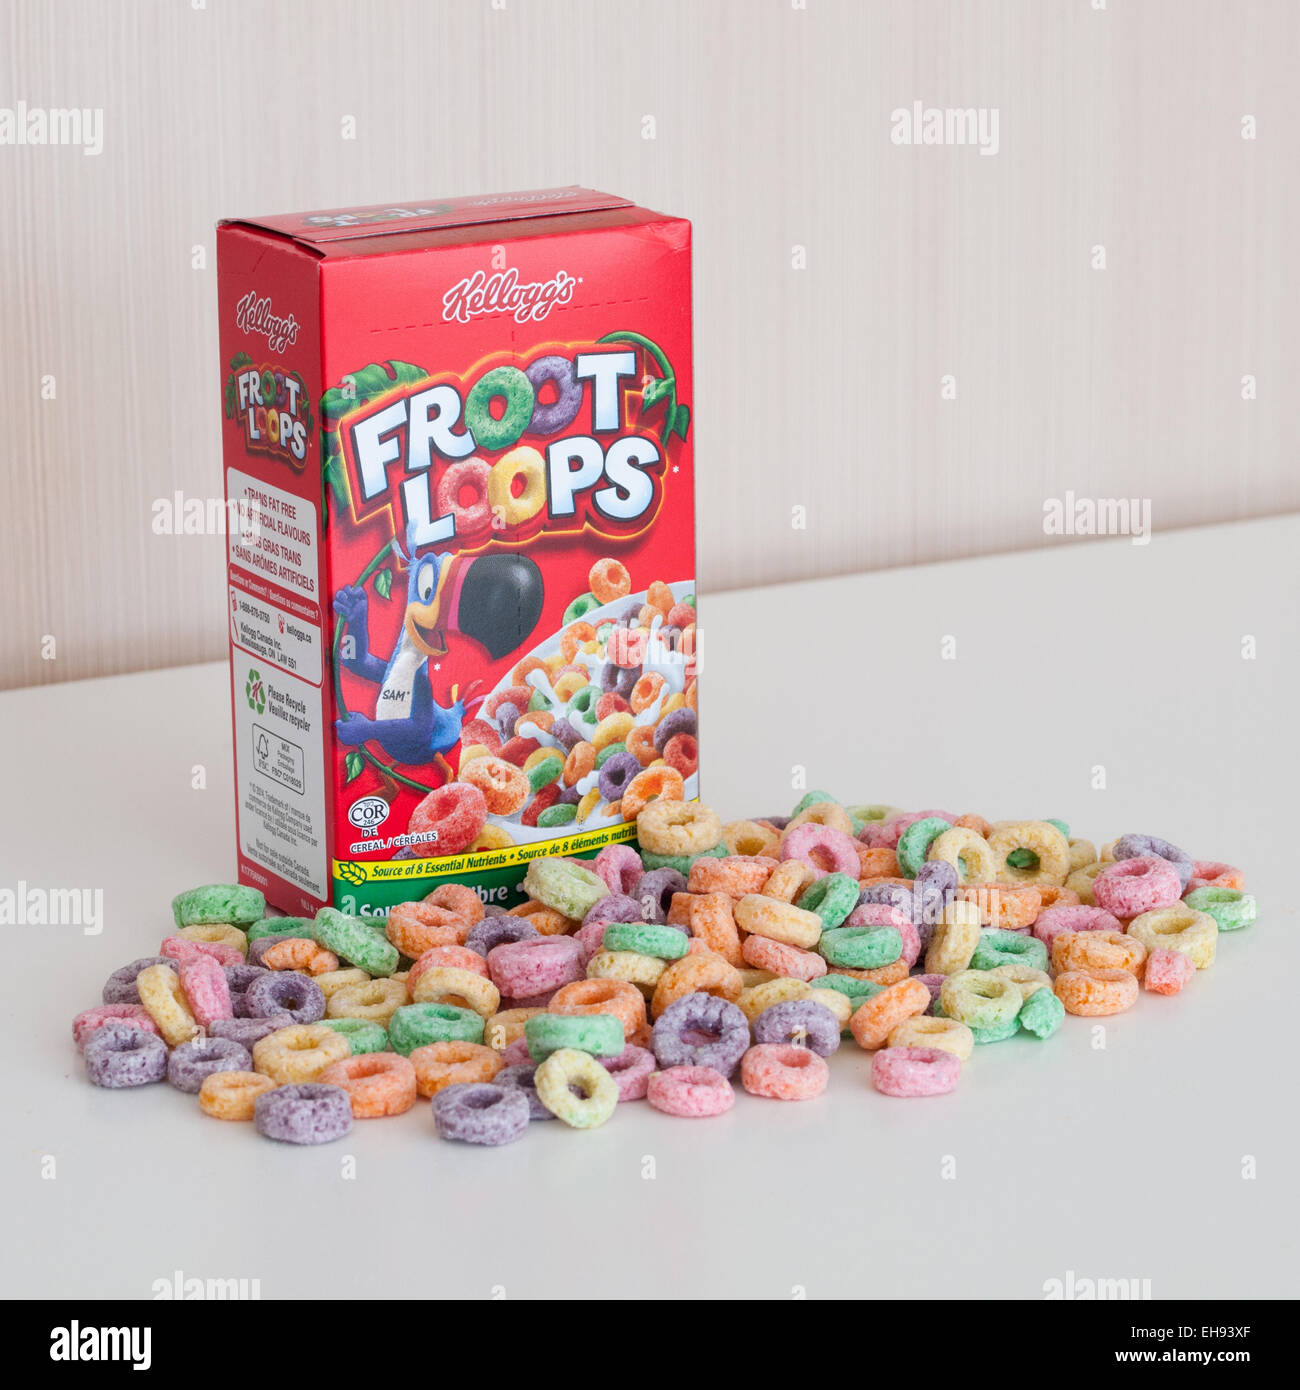 A fun-packed sized box of Kellogg's Froot Loops cereal. Canadian